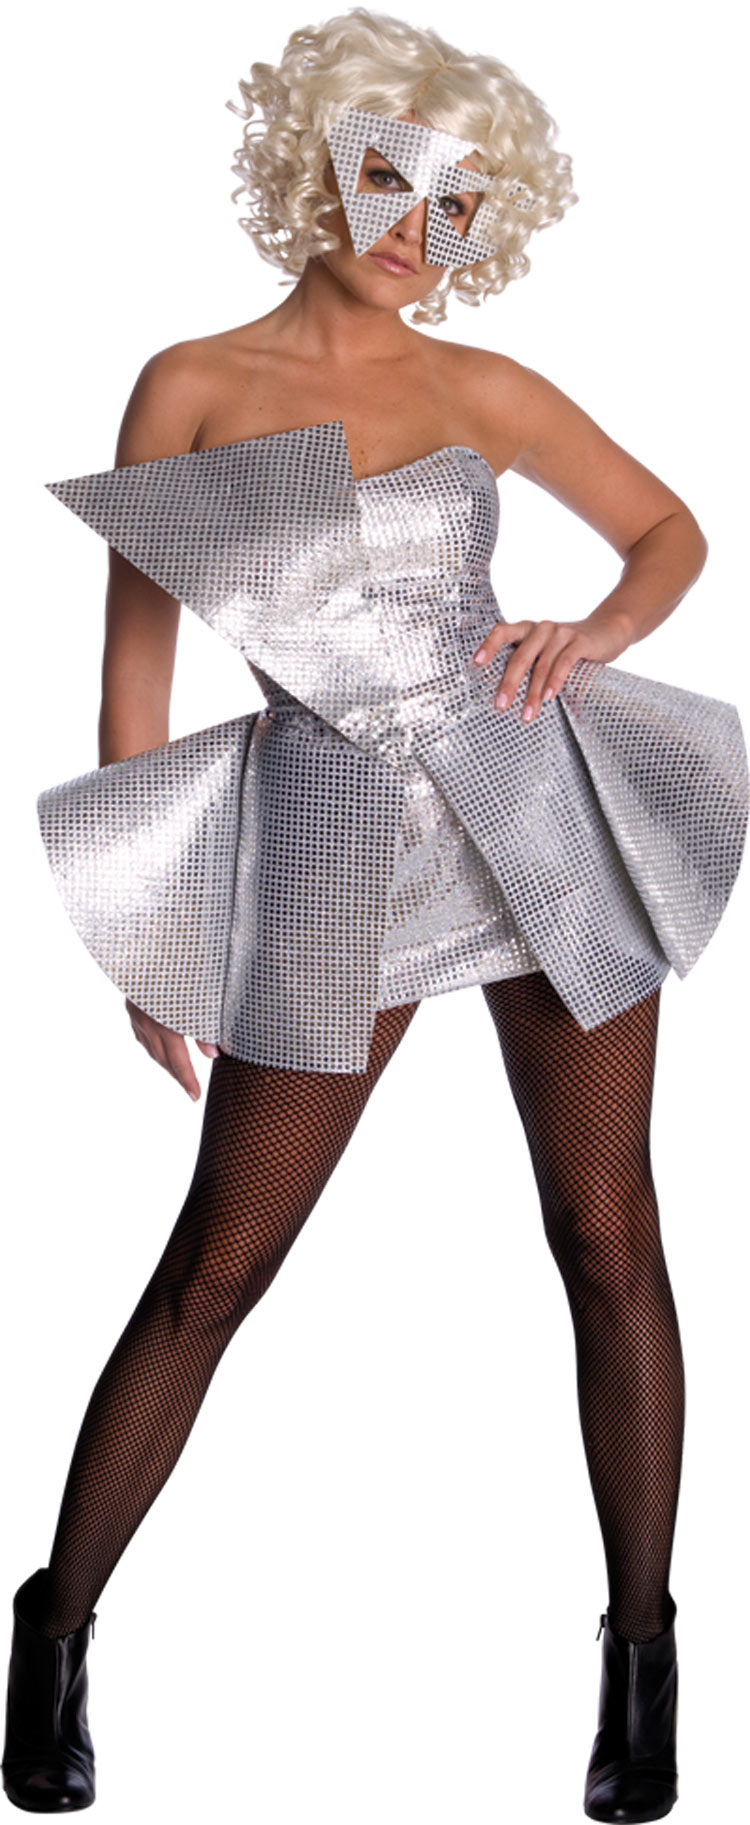 Lady Gaga Costume Silver Sequin Dress s Small 6 to 10